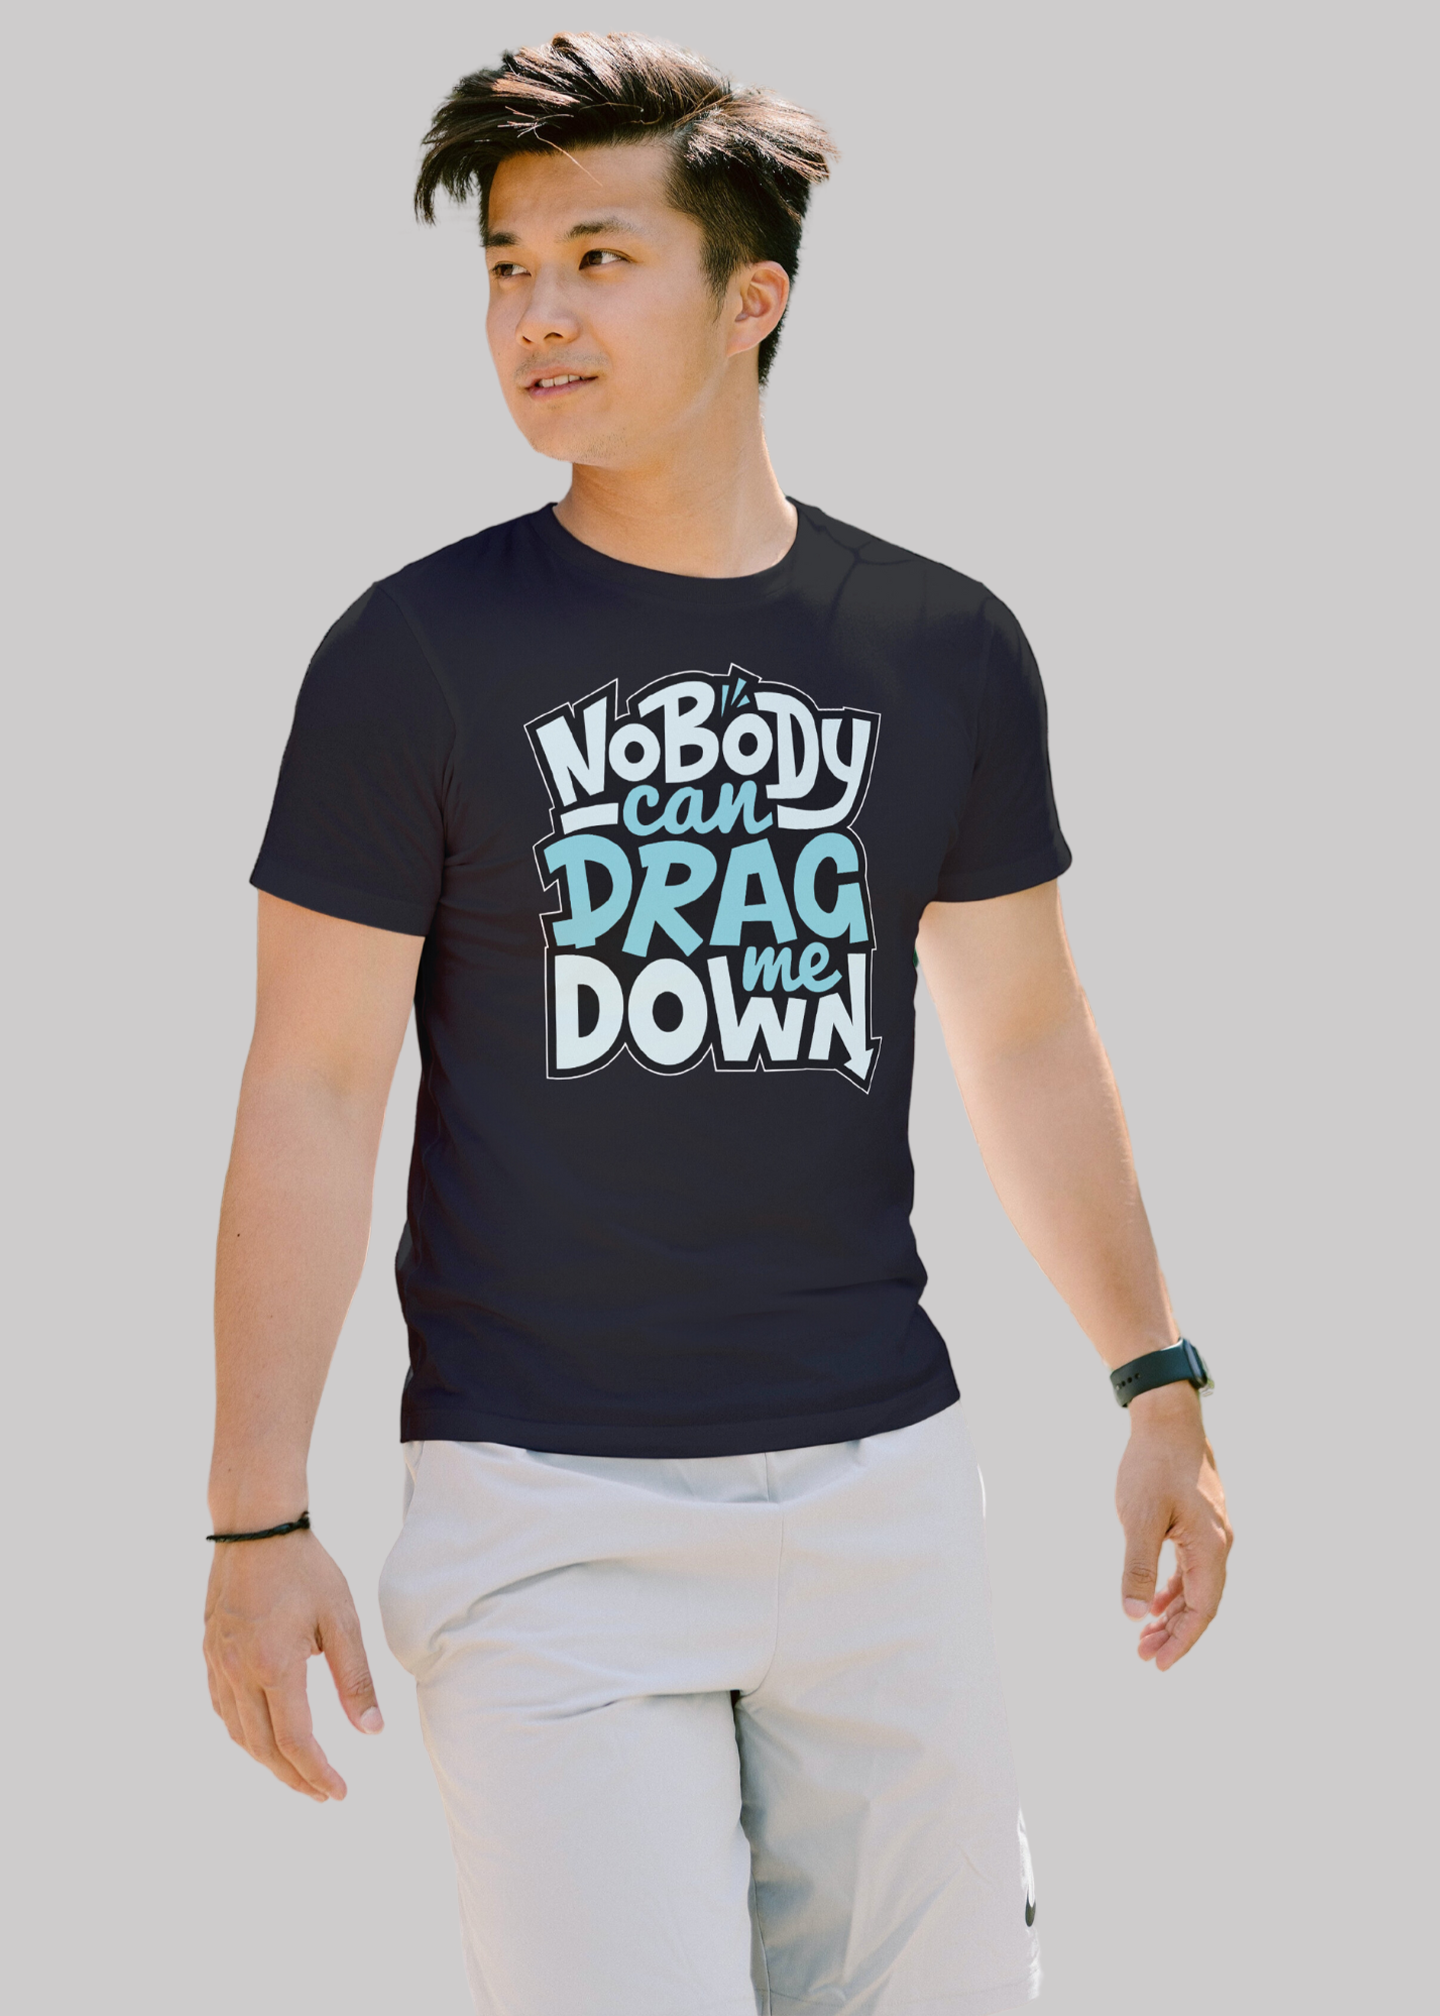 Nobody can drag me down Printed Half Sleeve Premium Cotton T-shirt For Men